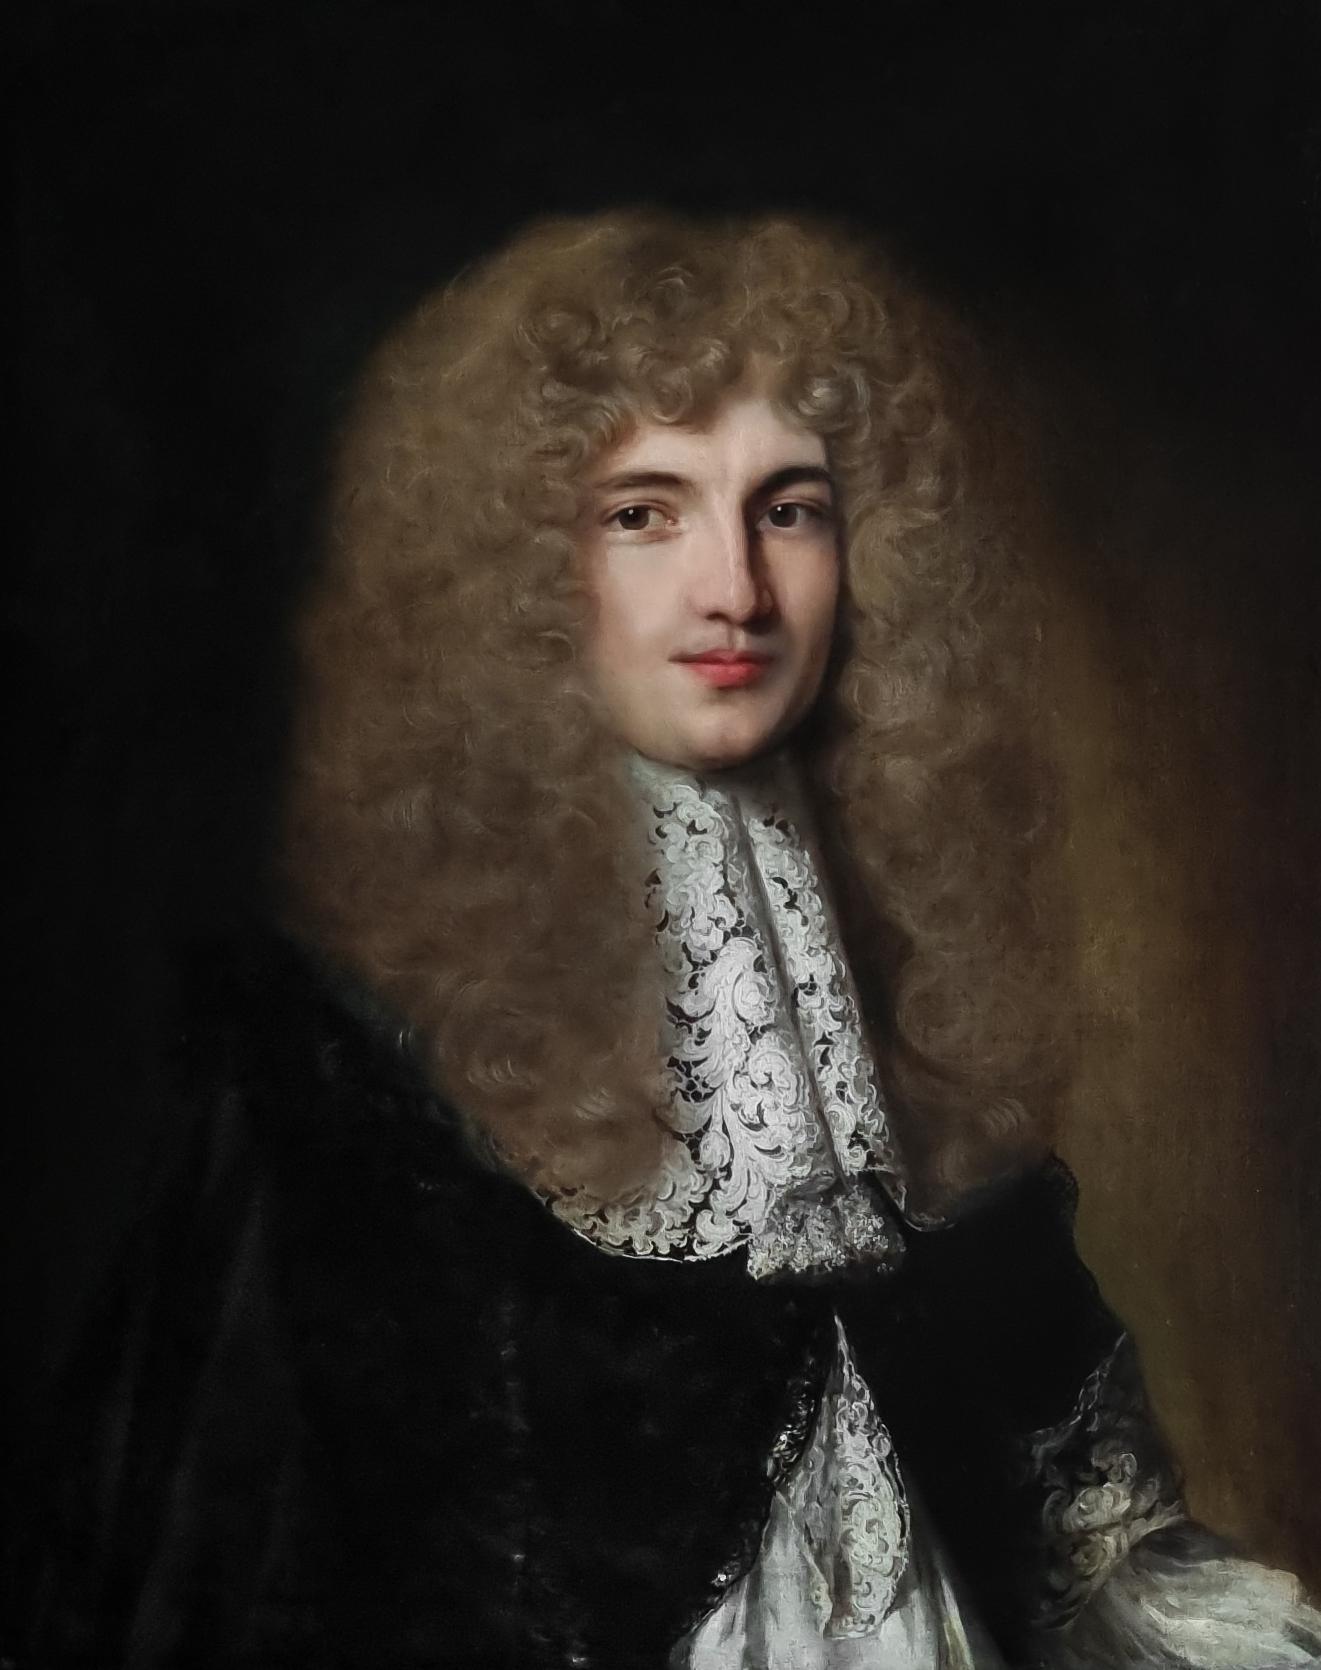 Portrait Painting of a Gentleman with a Black Coat and Elaborate Lace Collar - Old Masters Art by Ferdinand Voet known as 